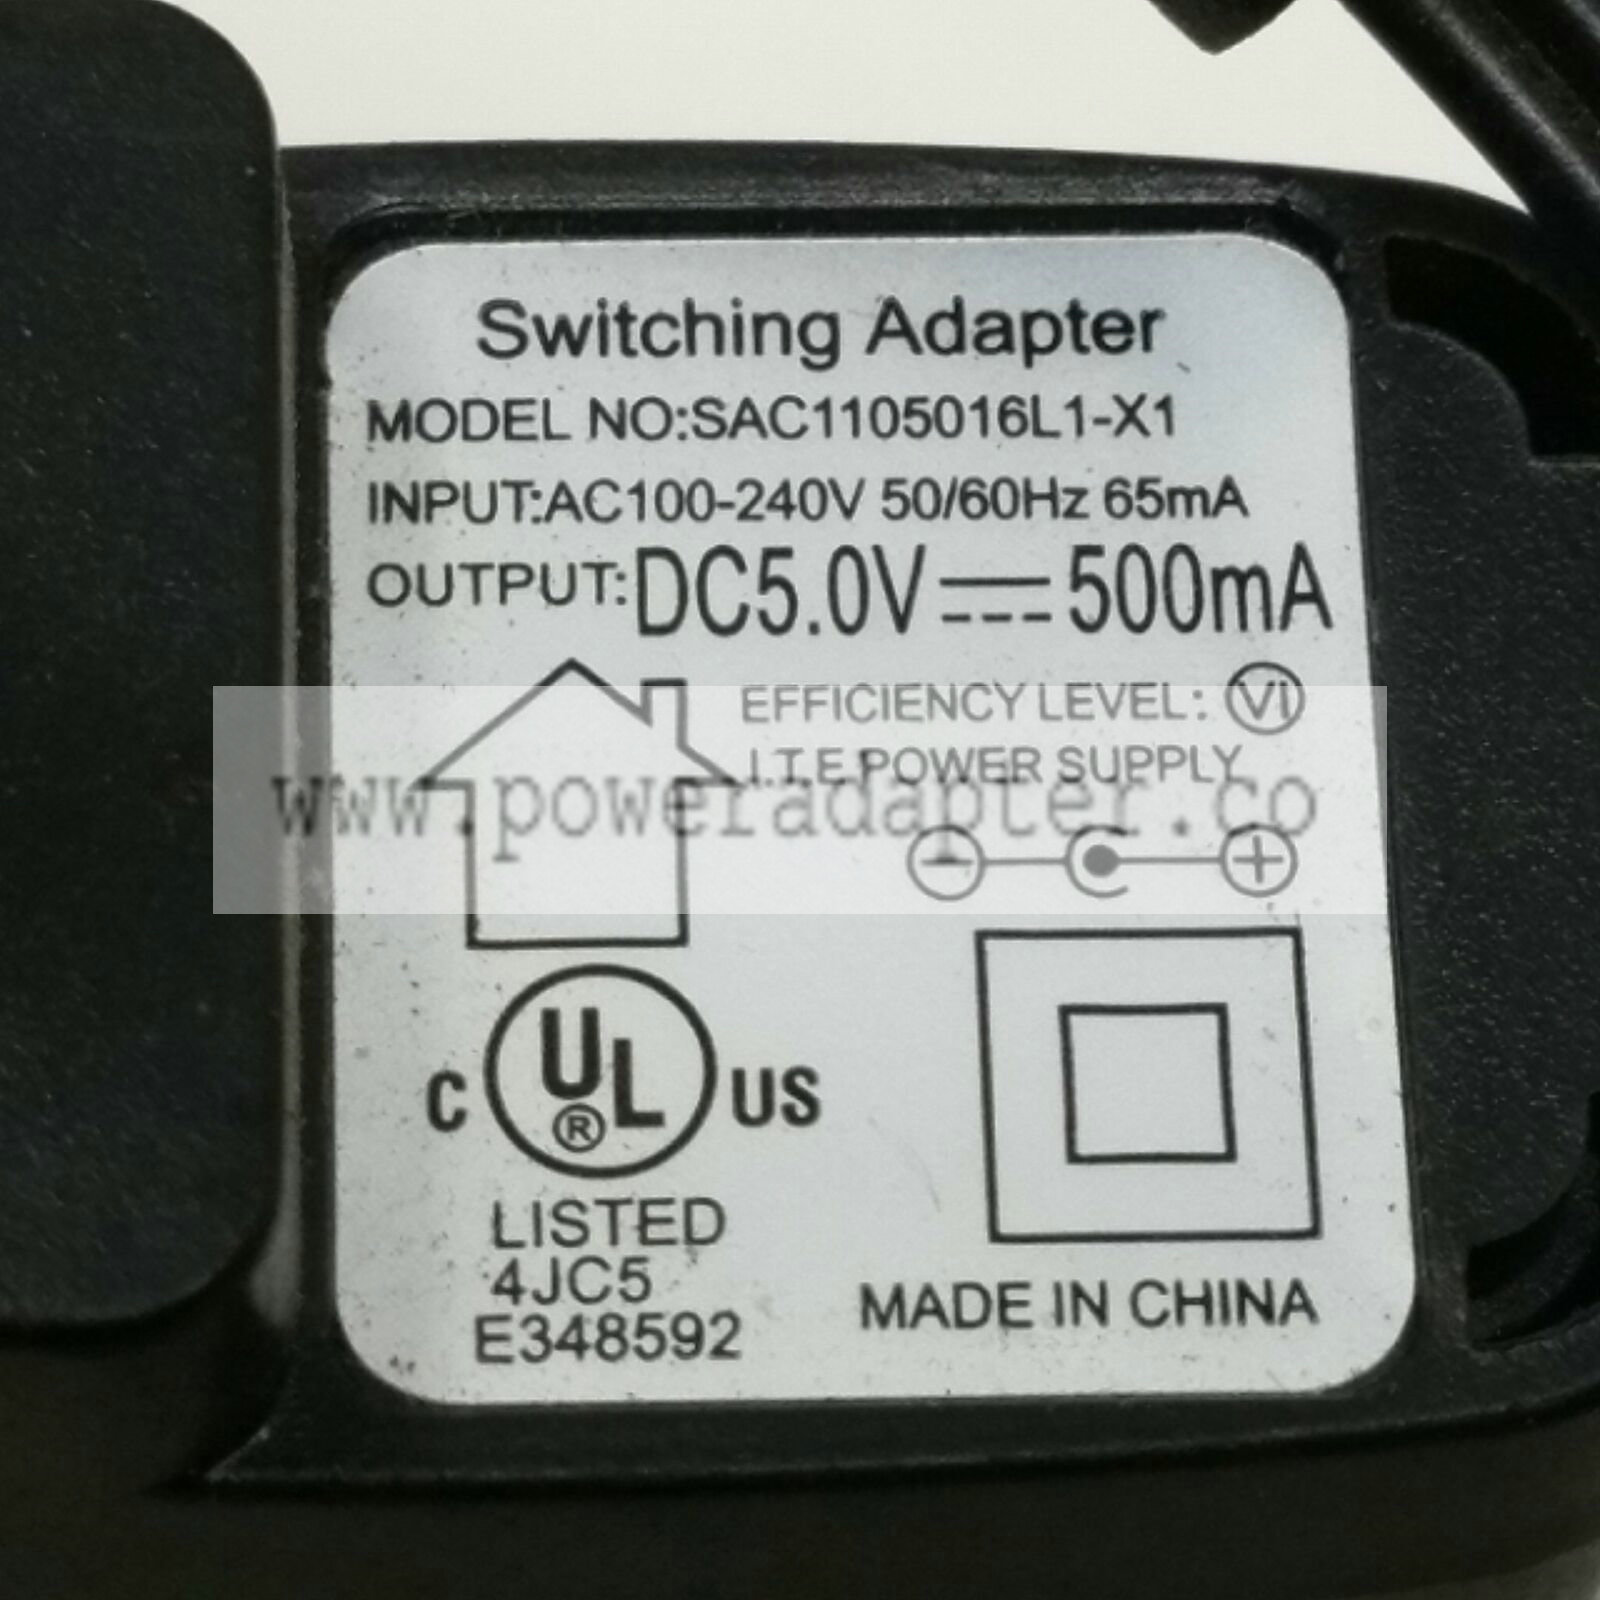 Switching Adapter AC Adapter Model SAC1105016L1-X1 Output 5VDC 500mA Brand: unbranded MPN: SAC1105016L1-X1 Model: S